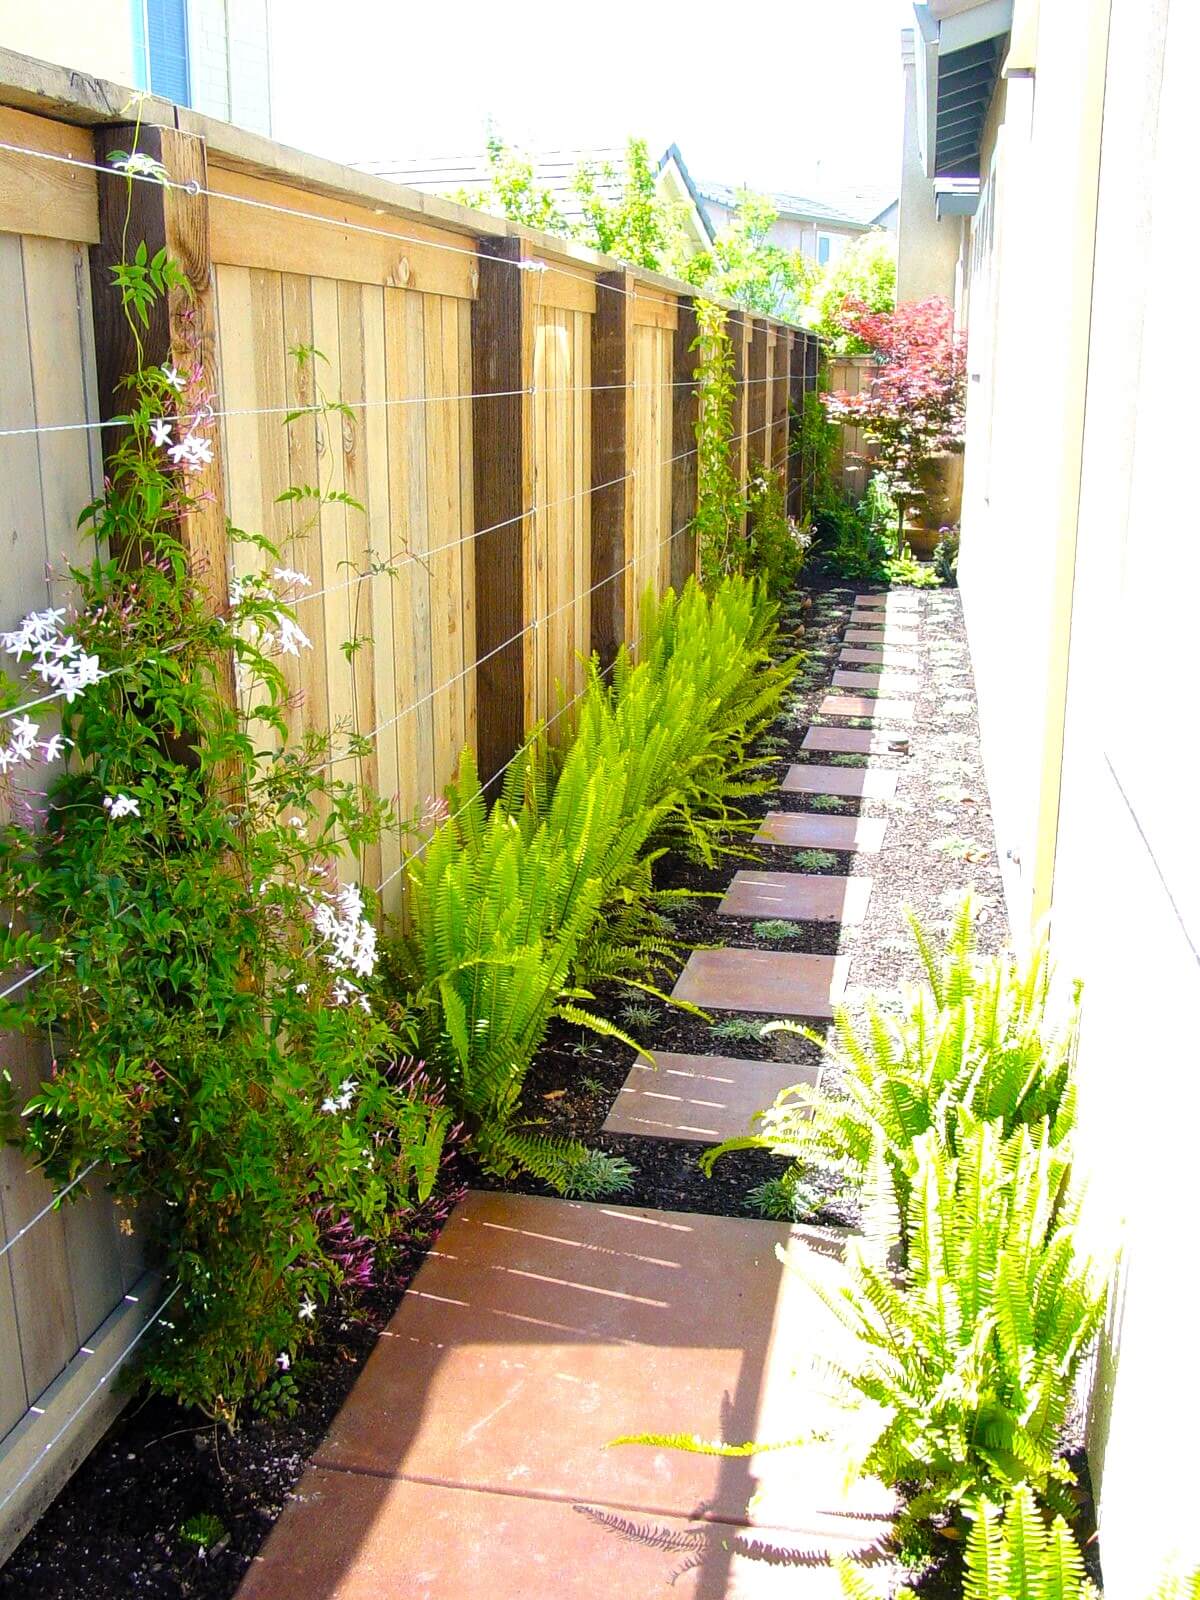 Square paver walkway amid grave and low ground cover plantings leading down narrow side yard of California home